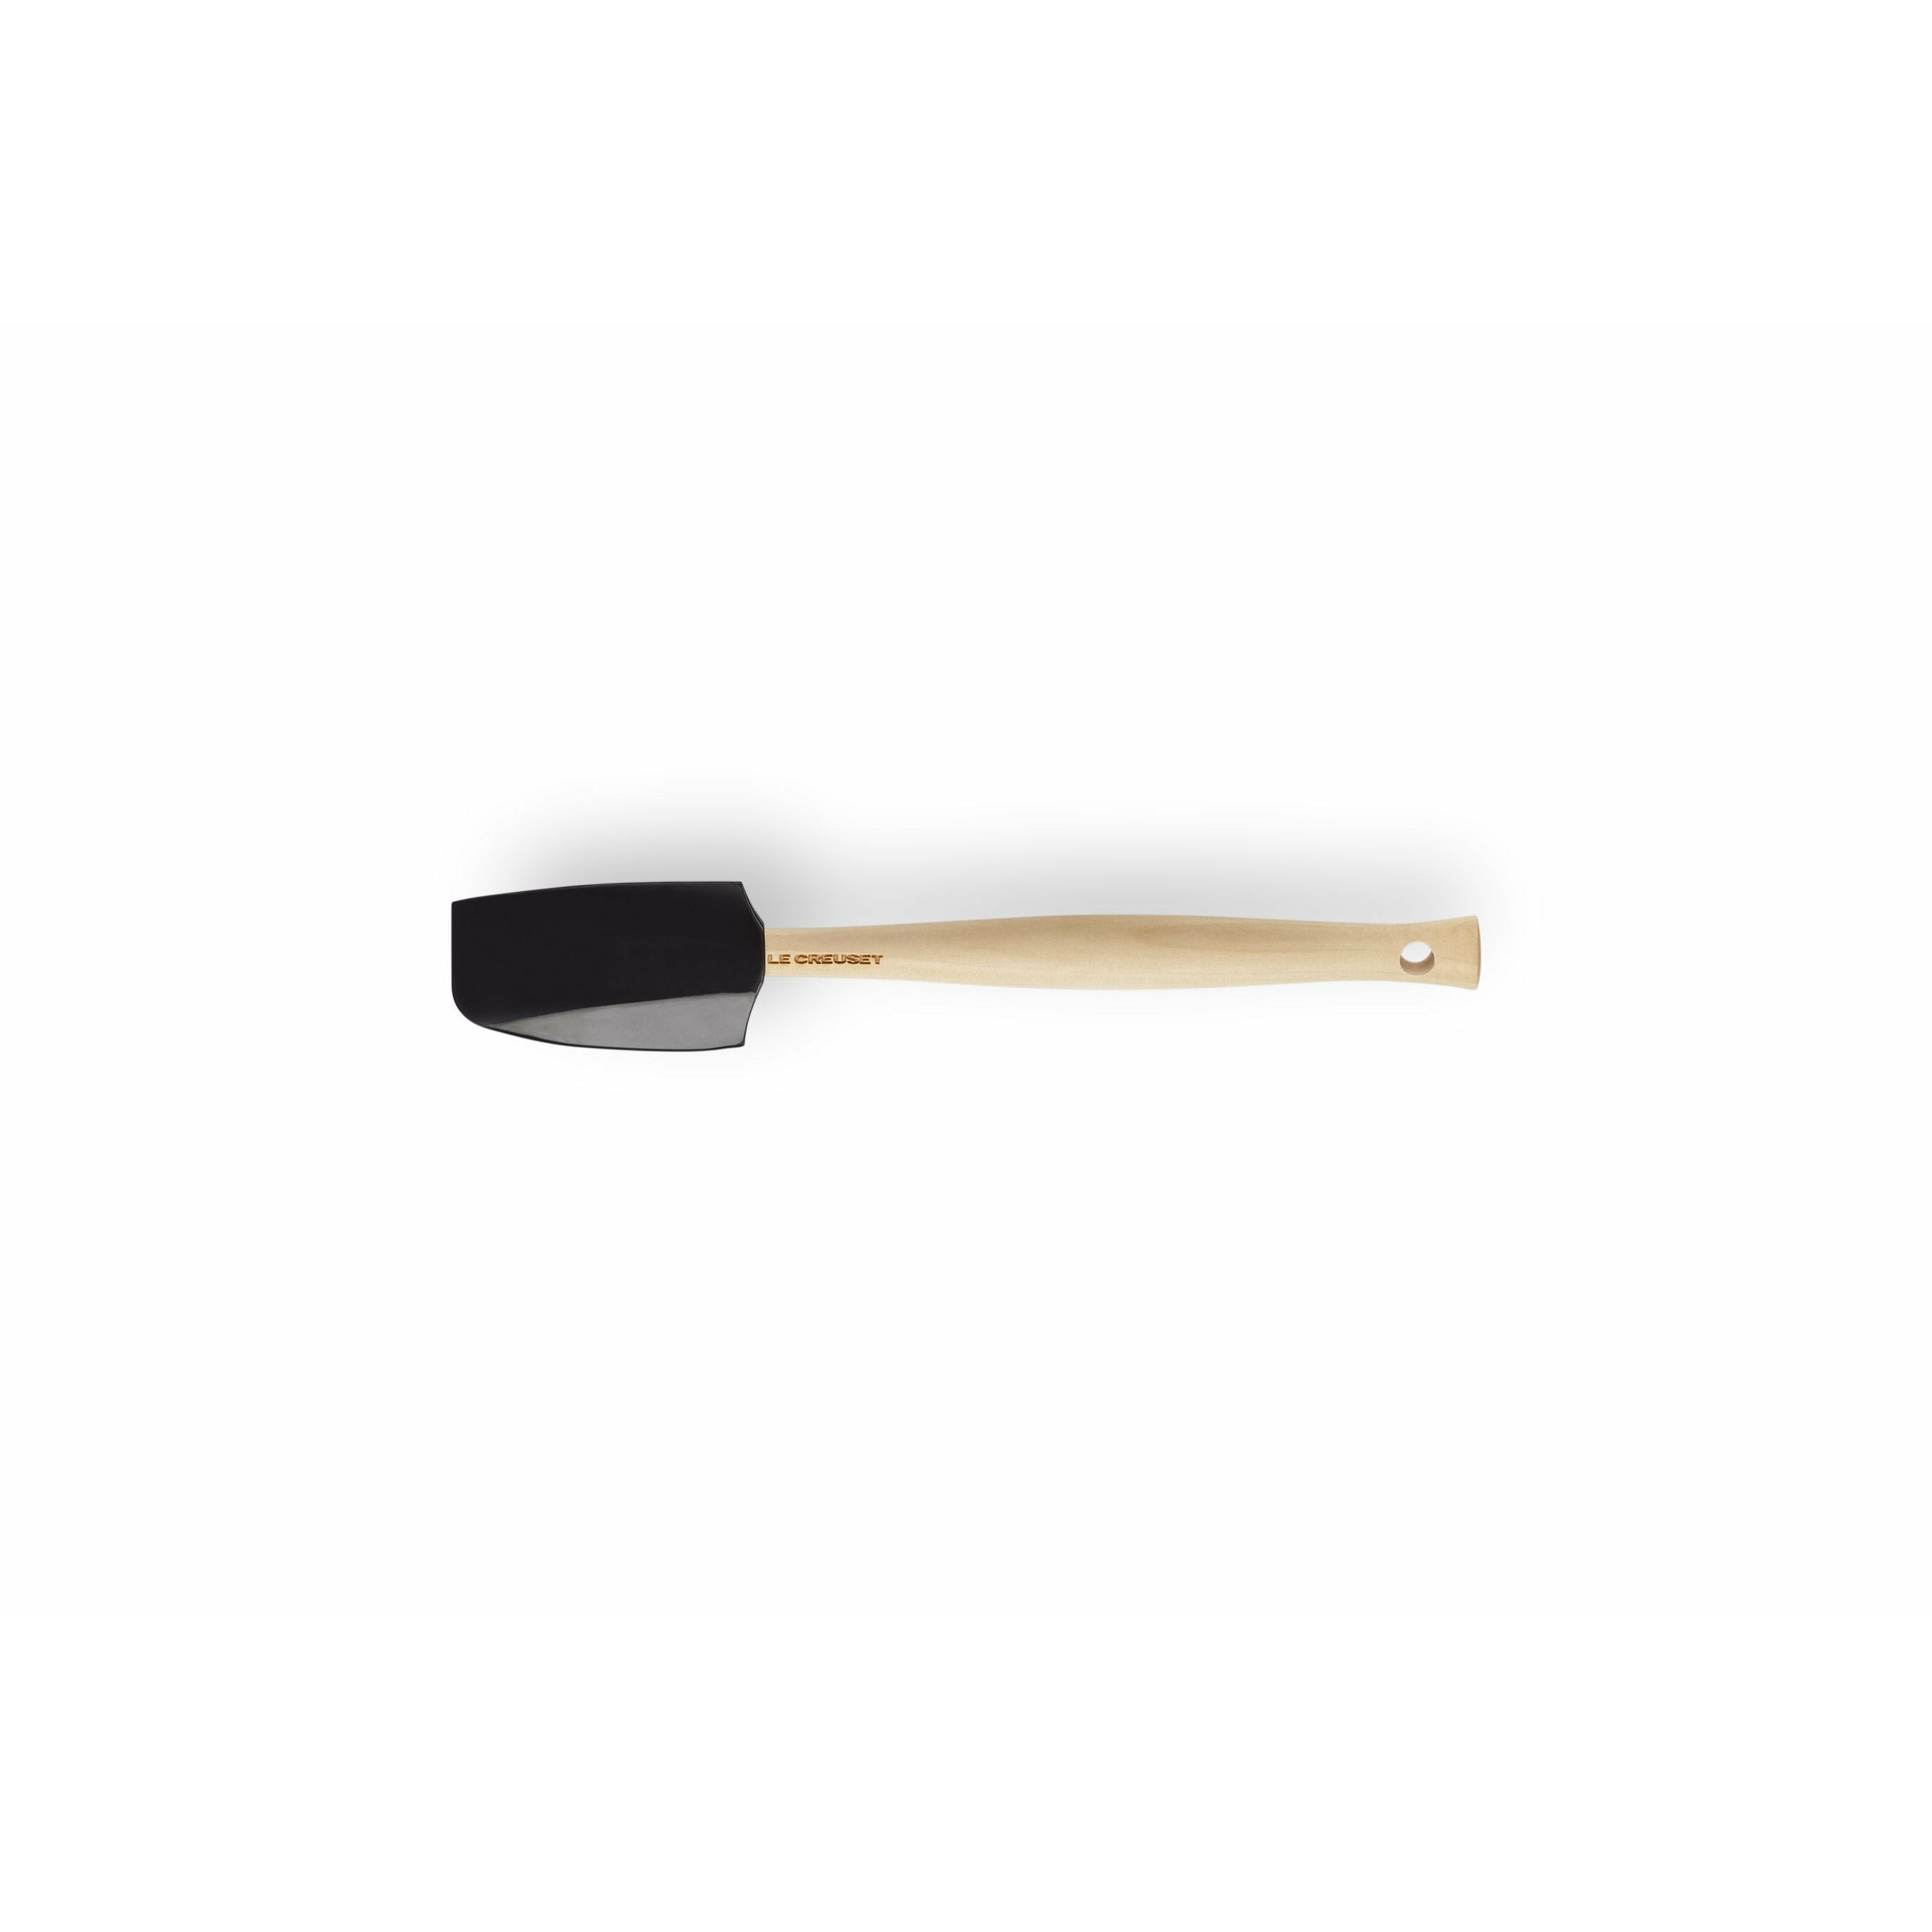 Le Creuset Cooking Trowel Craft Small, Black